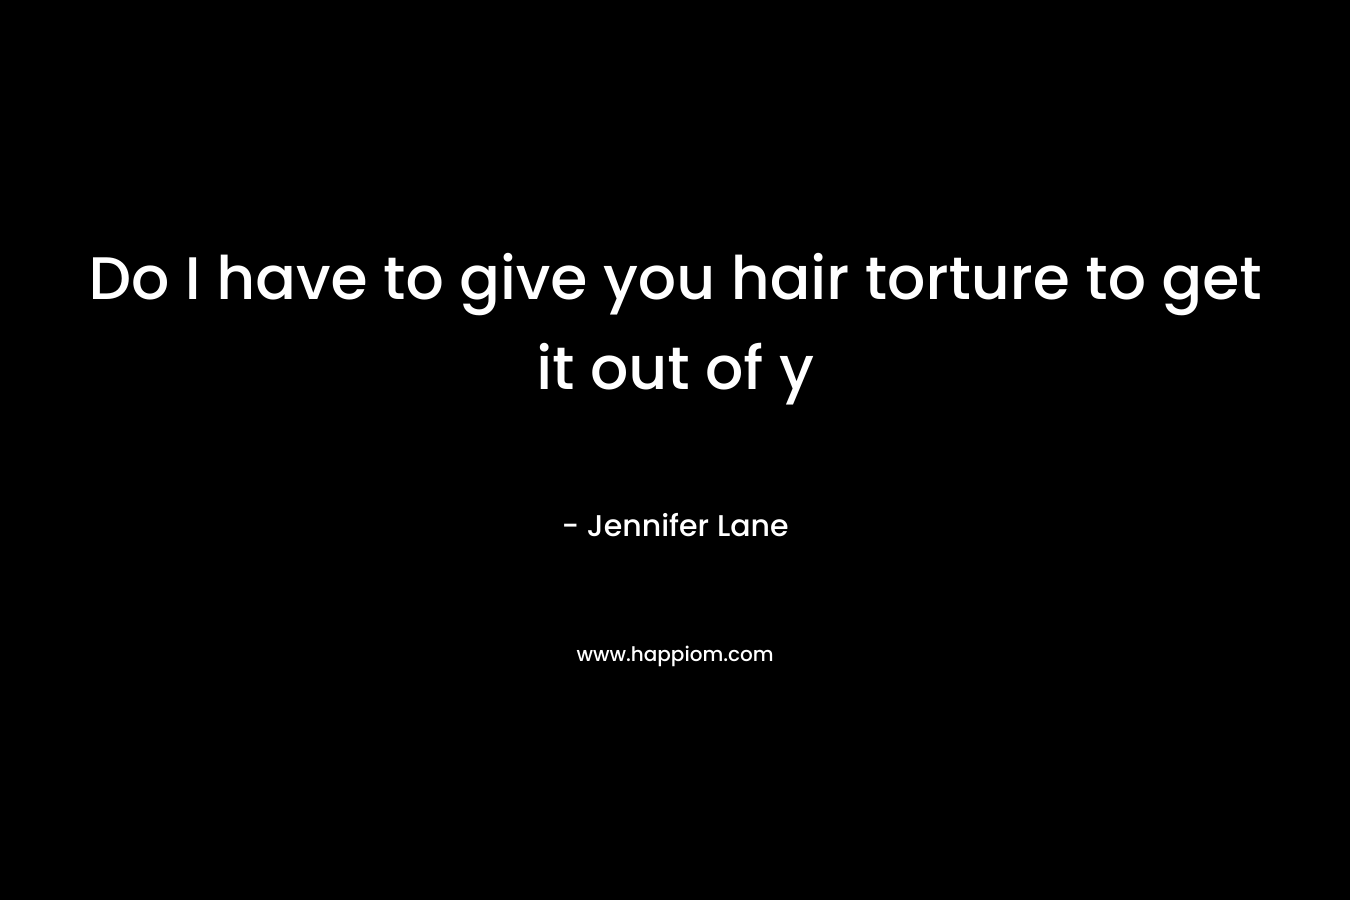 Do I have to give you hair torture to get it out of y – Jennifer Lane